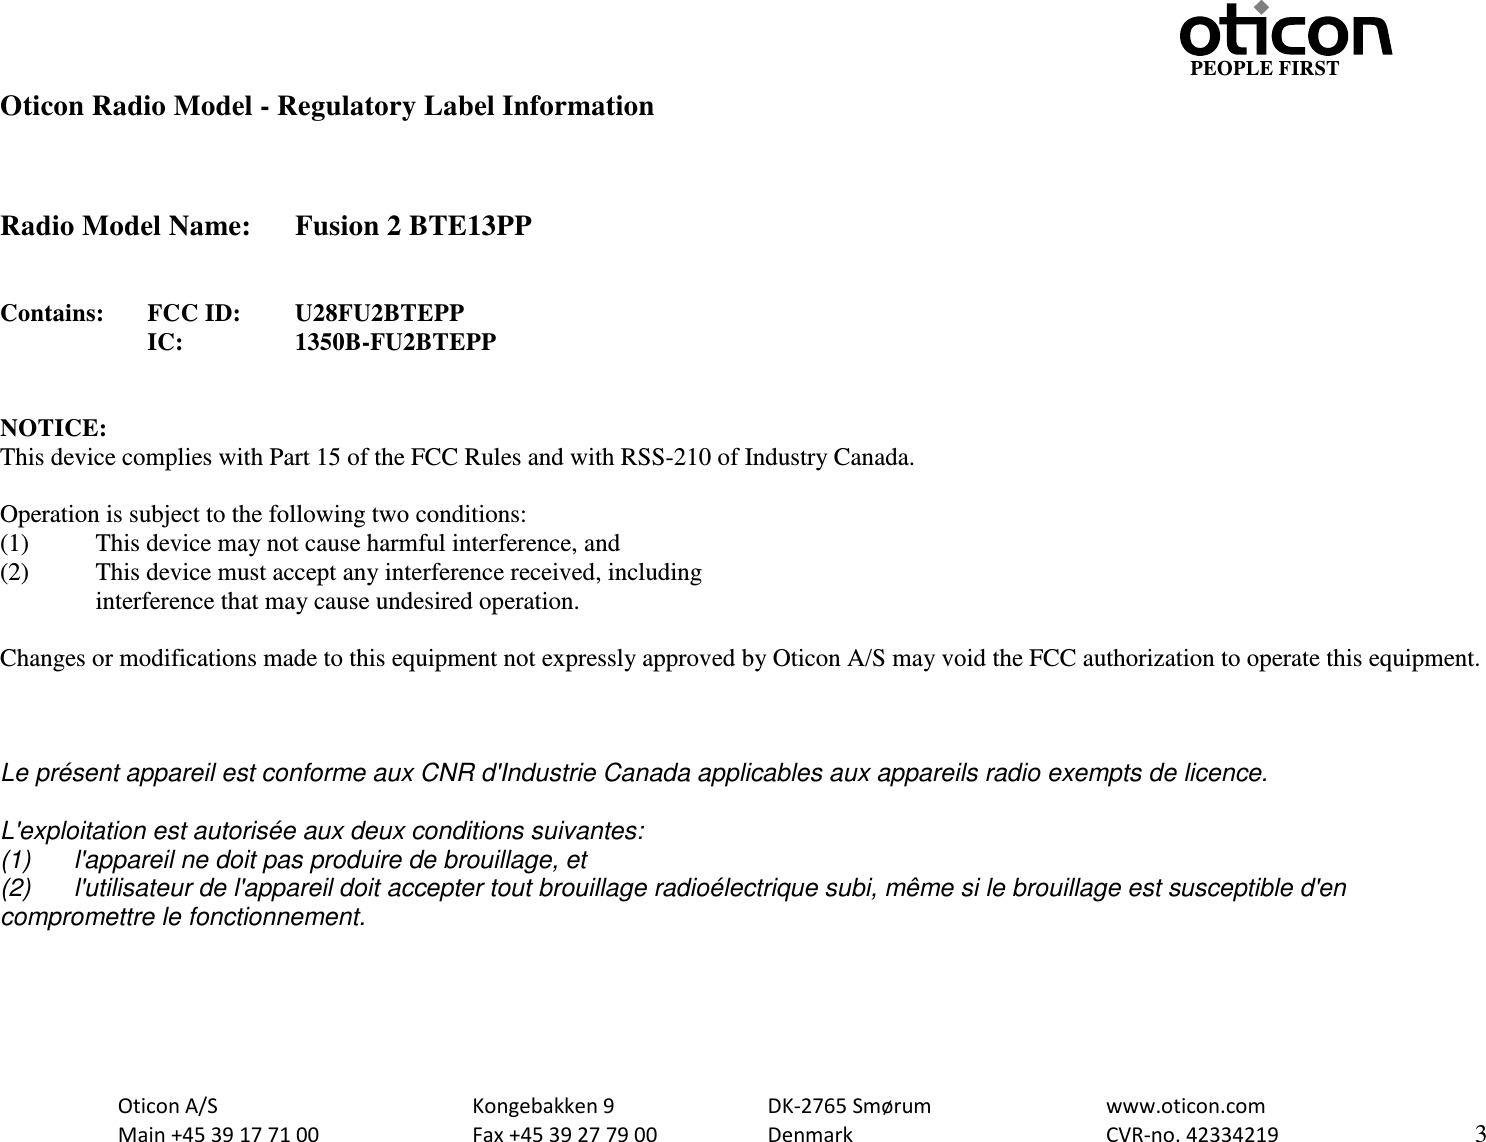                                                     PEOPLE FIRST Oticon Radio Model - Regulatory Label Information    Radio Model Name: Fusion 2 BTE13PP   Contains:  FCC ID:  U28FU2BTEPP      IC:    1350B-FU2BTEPP   NOTICE: This device complies with Part 15 of the FCC Rules and with RSS-210 of Industry Canada.  Operation is subject to the following two conditions: (1)   This device may not cause harmful interference, and (2)   This device must accept any interference received, including  interference that may cause undesired operation.  Changes or modifications made to this equipment not expressly approved by Oticon A/S may void the FCC authorization to operate this equipment.    Le présent appareil est conforme aux CNR d&apos;Industrie Canada applicables aux appareils radio exempts de licence.  L&apos;exploitation est autorisée aux deux conditions suivantes: (1) l&apos;appareil ne doit pas produire de brouillage, et  (2) l&apos;utilisateur de l&apos;appareil doit accepter tout brouillage radioélectrique subi, même si le brouillage est susceptible d&apos;en compromettre le fonctionnement.   Oticon A/S      Kongebakken 9   DK-2765 Smørum   www.oticon.com  Main +45 39 17 71 00    Fax +45 39 27 79 00    Denmark    CVR-no. 42334219      3  